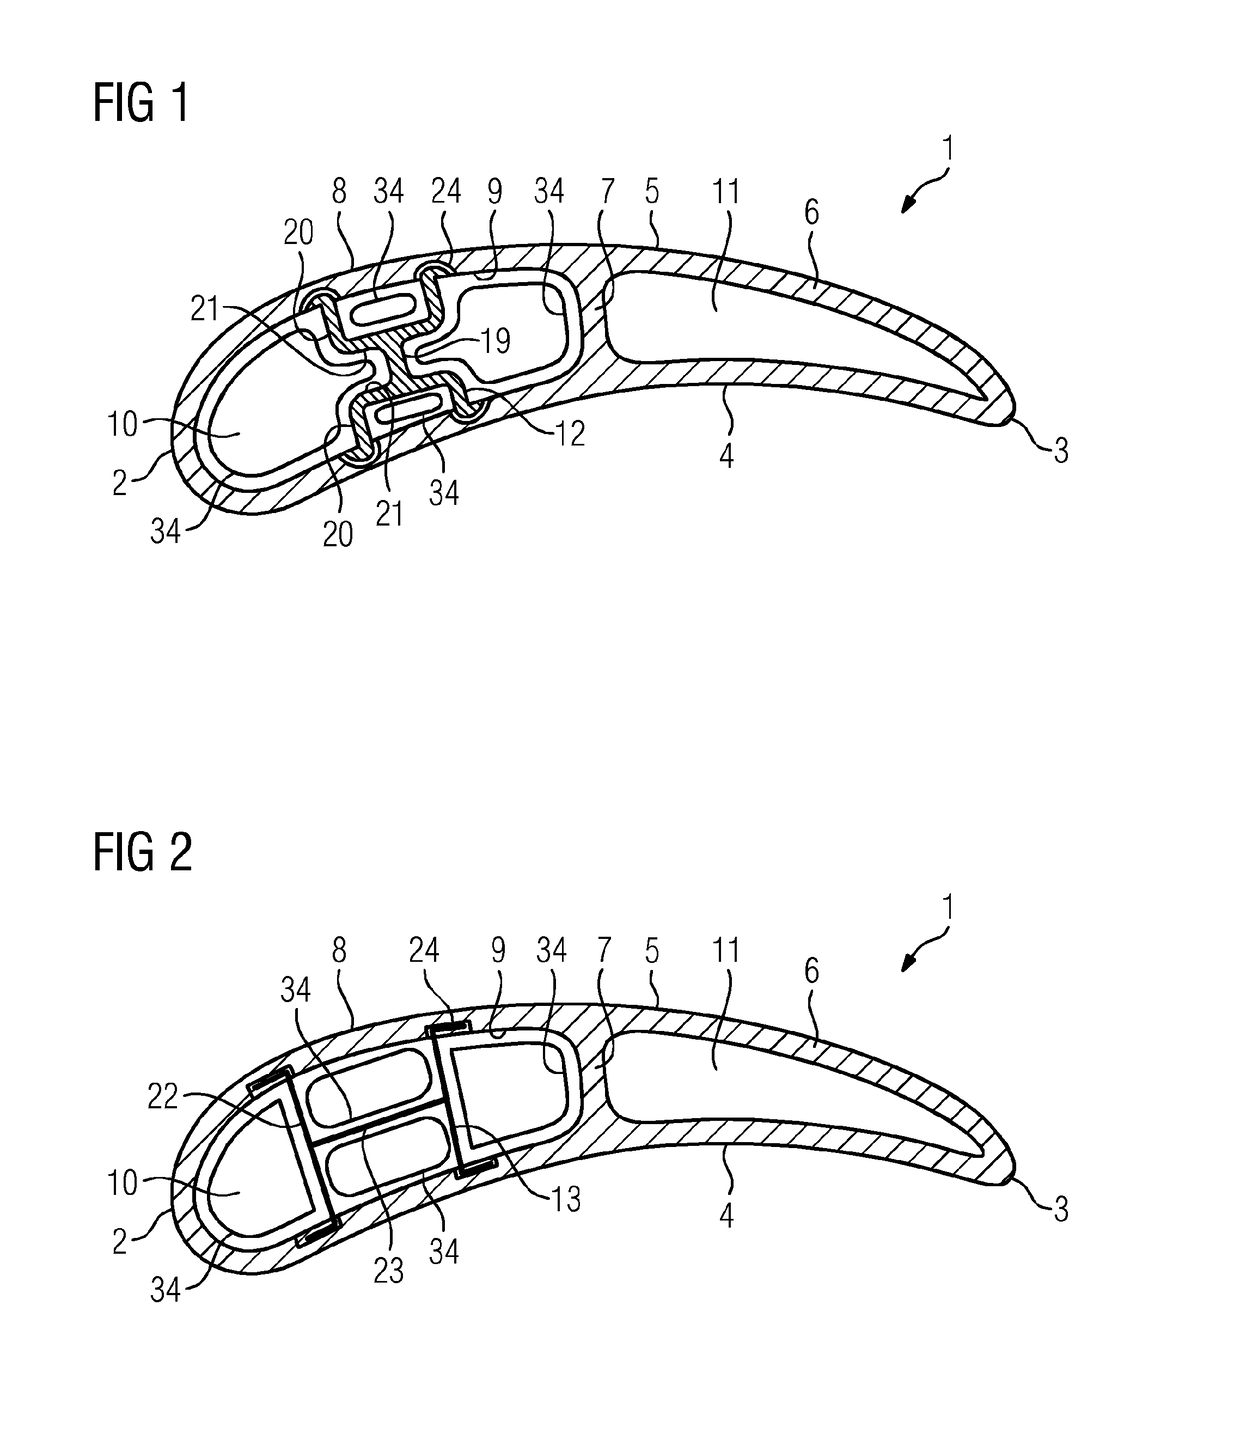 Hollow blade body, insertion rib, and hollow blade